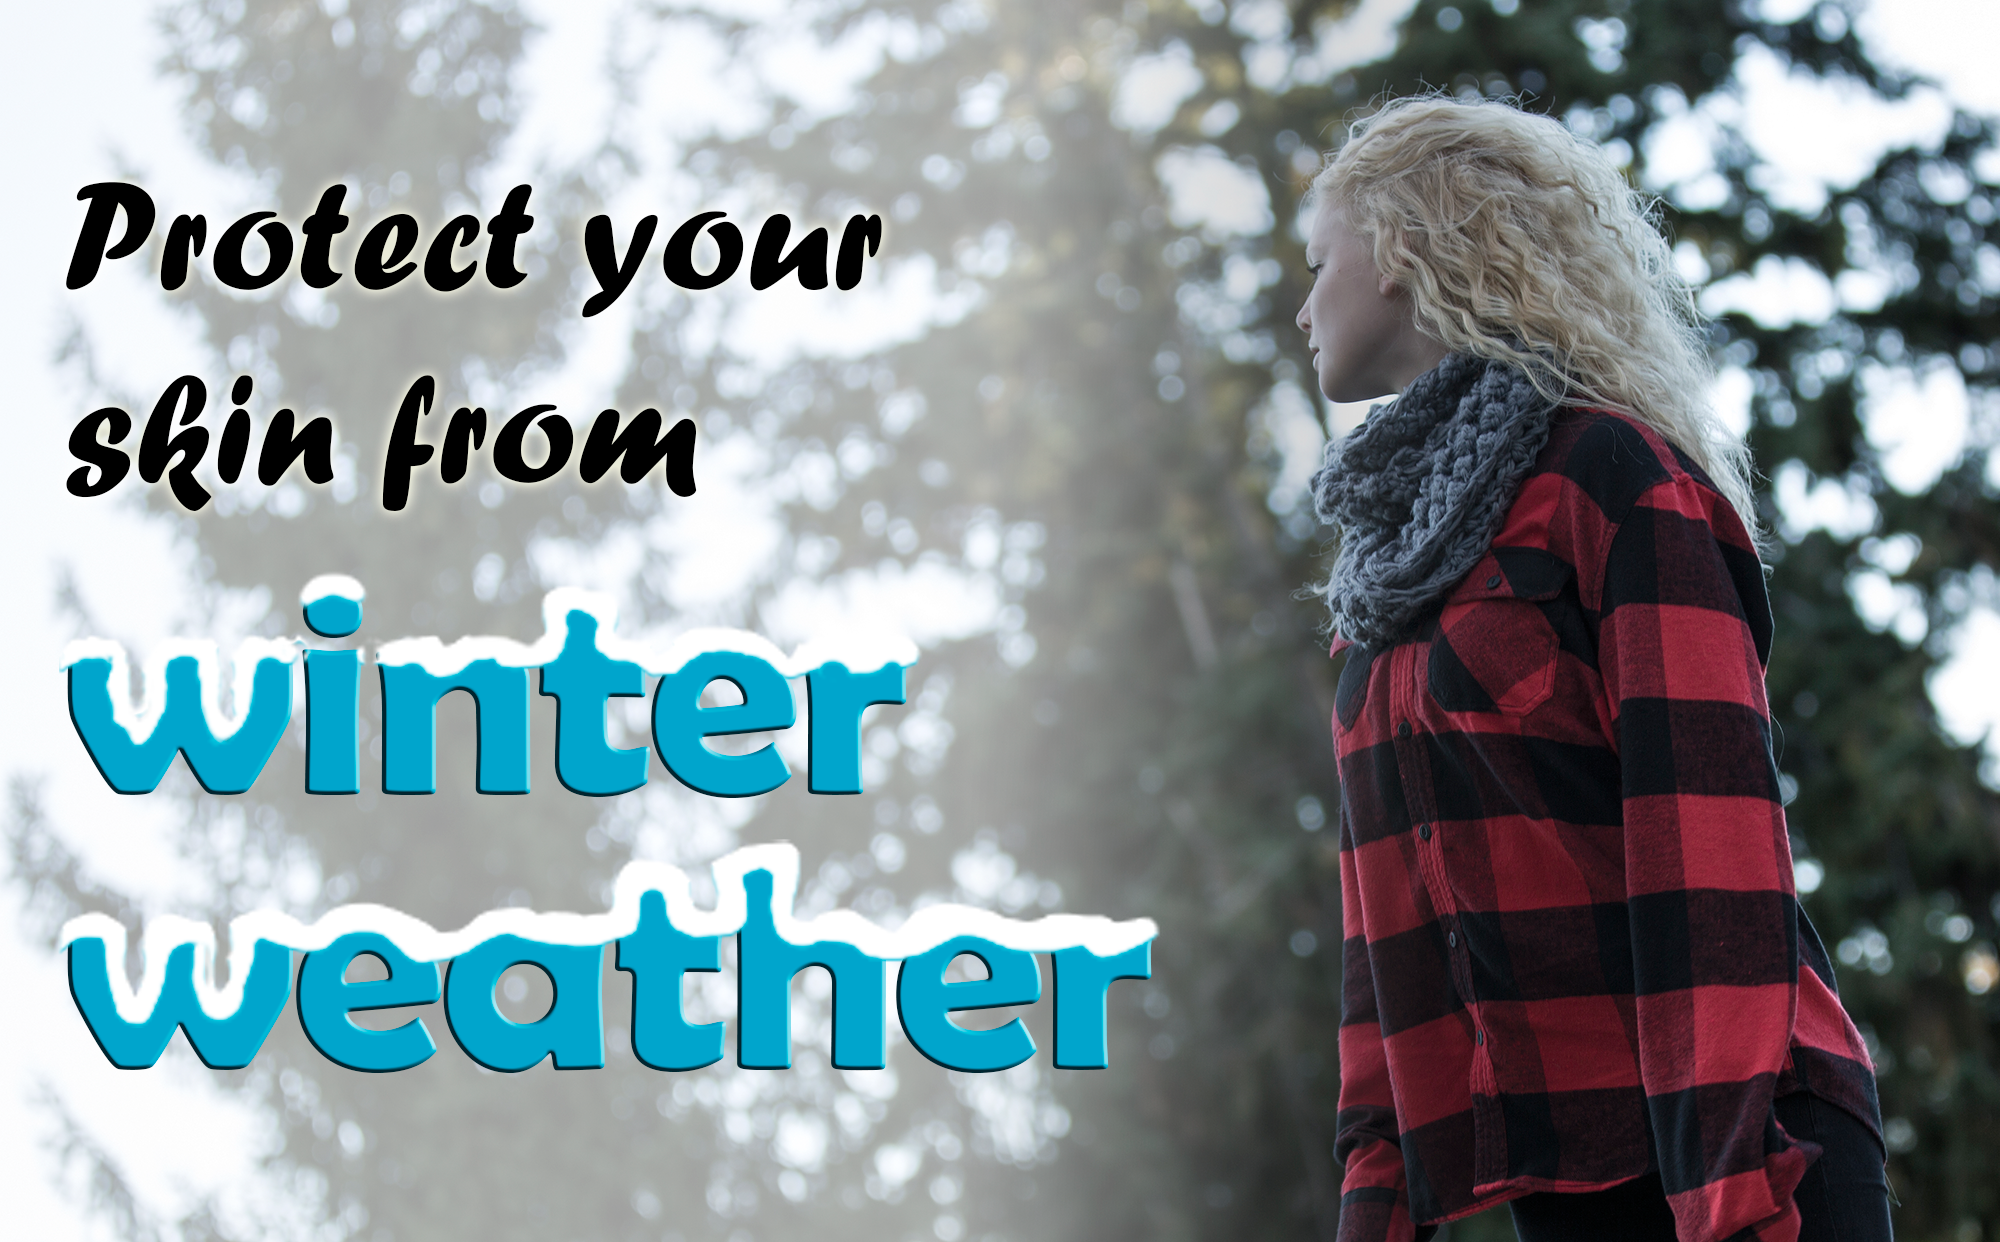 Protect your skin from winter weather